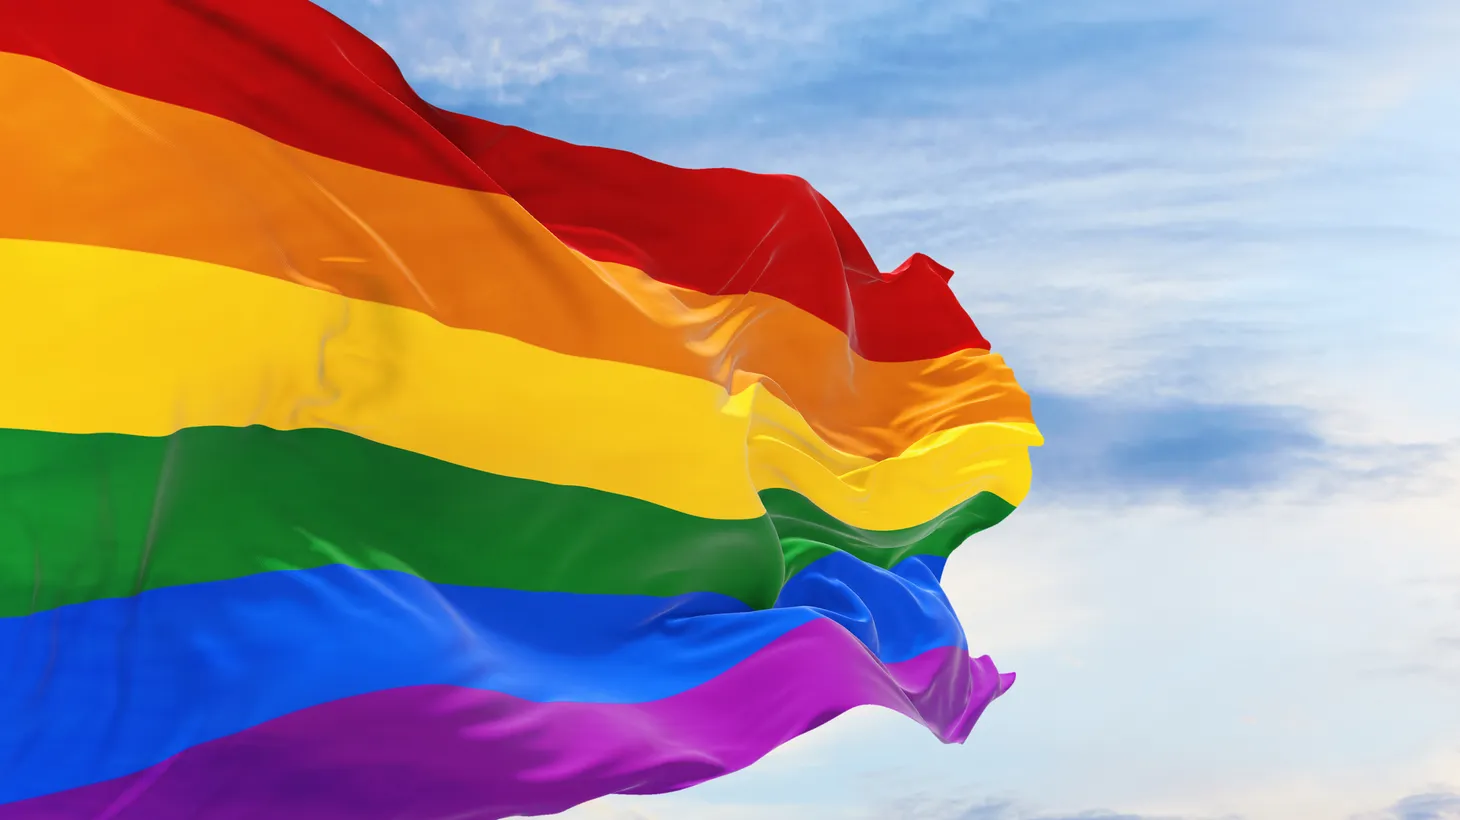 Huntington Beach’s city council has reversed a decision to fly the LGBTQ+ rainbow flag at city hall during June’s pride month.